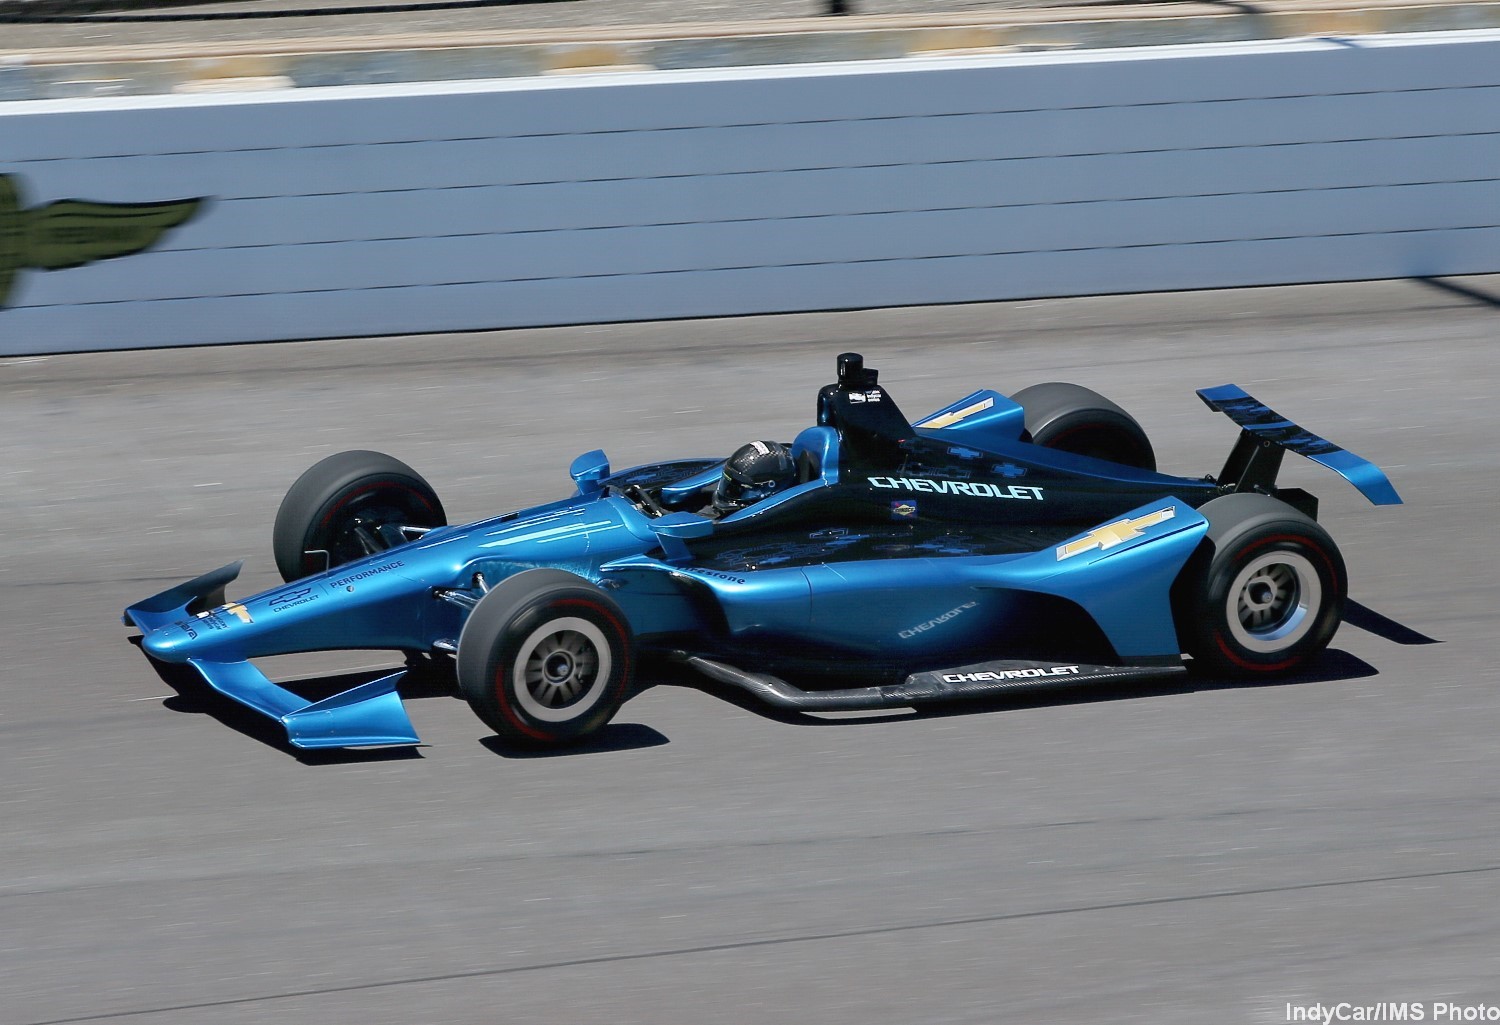 Juan Pablo Montoya tests the UAK-18 for the first time at Indianapolis, July 2017.